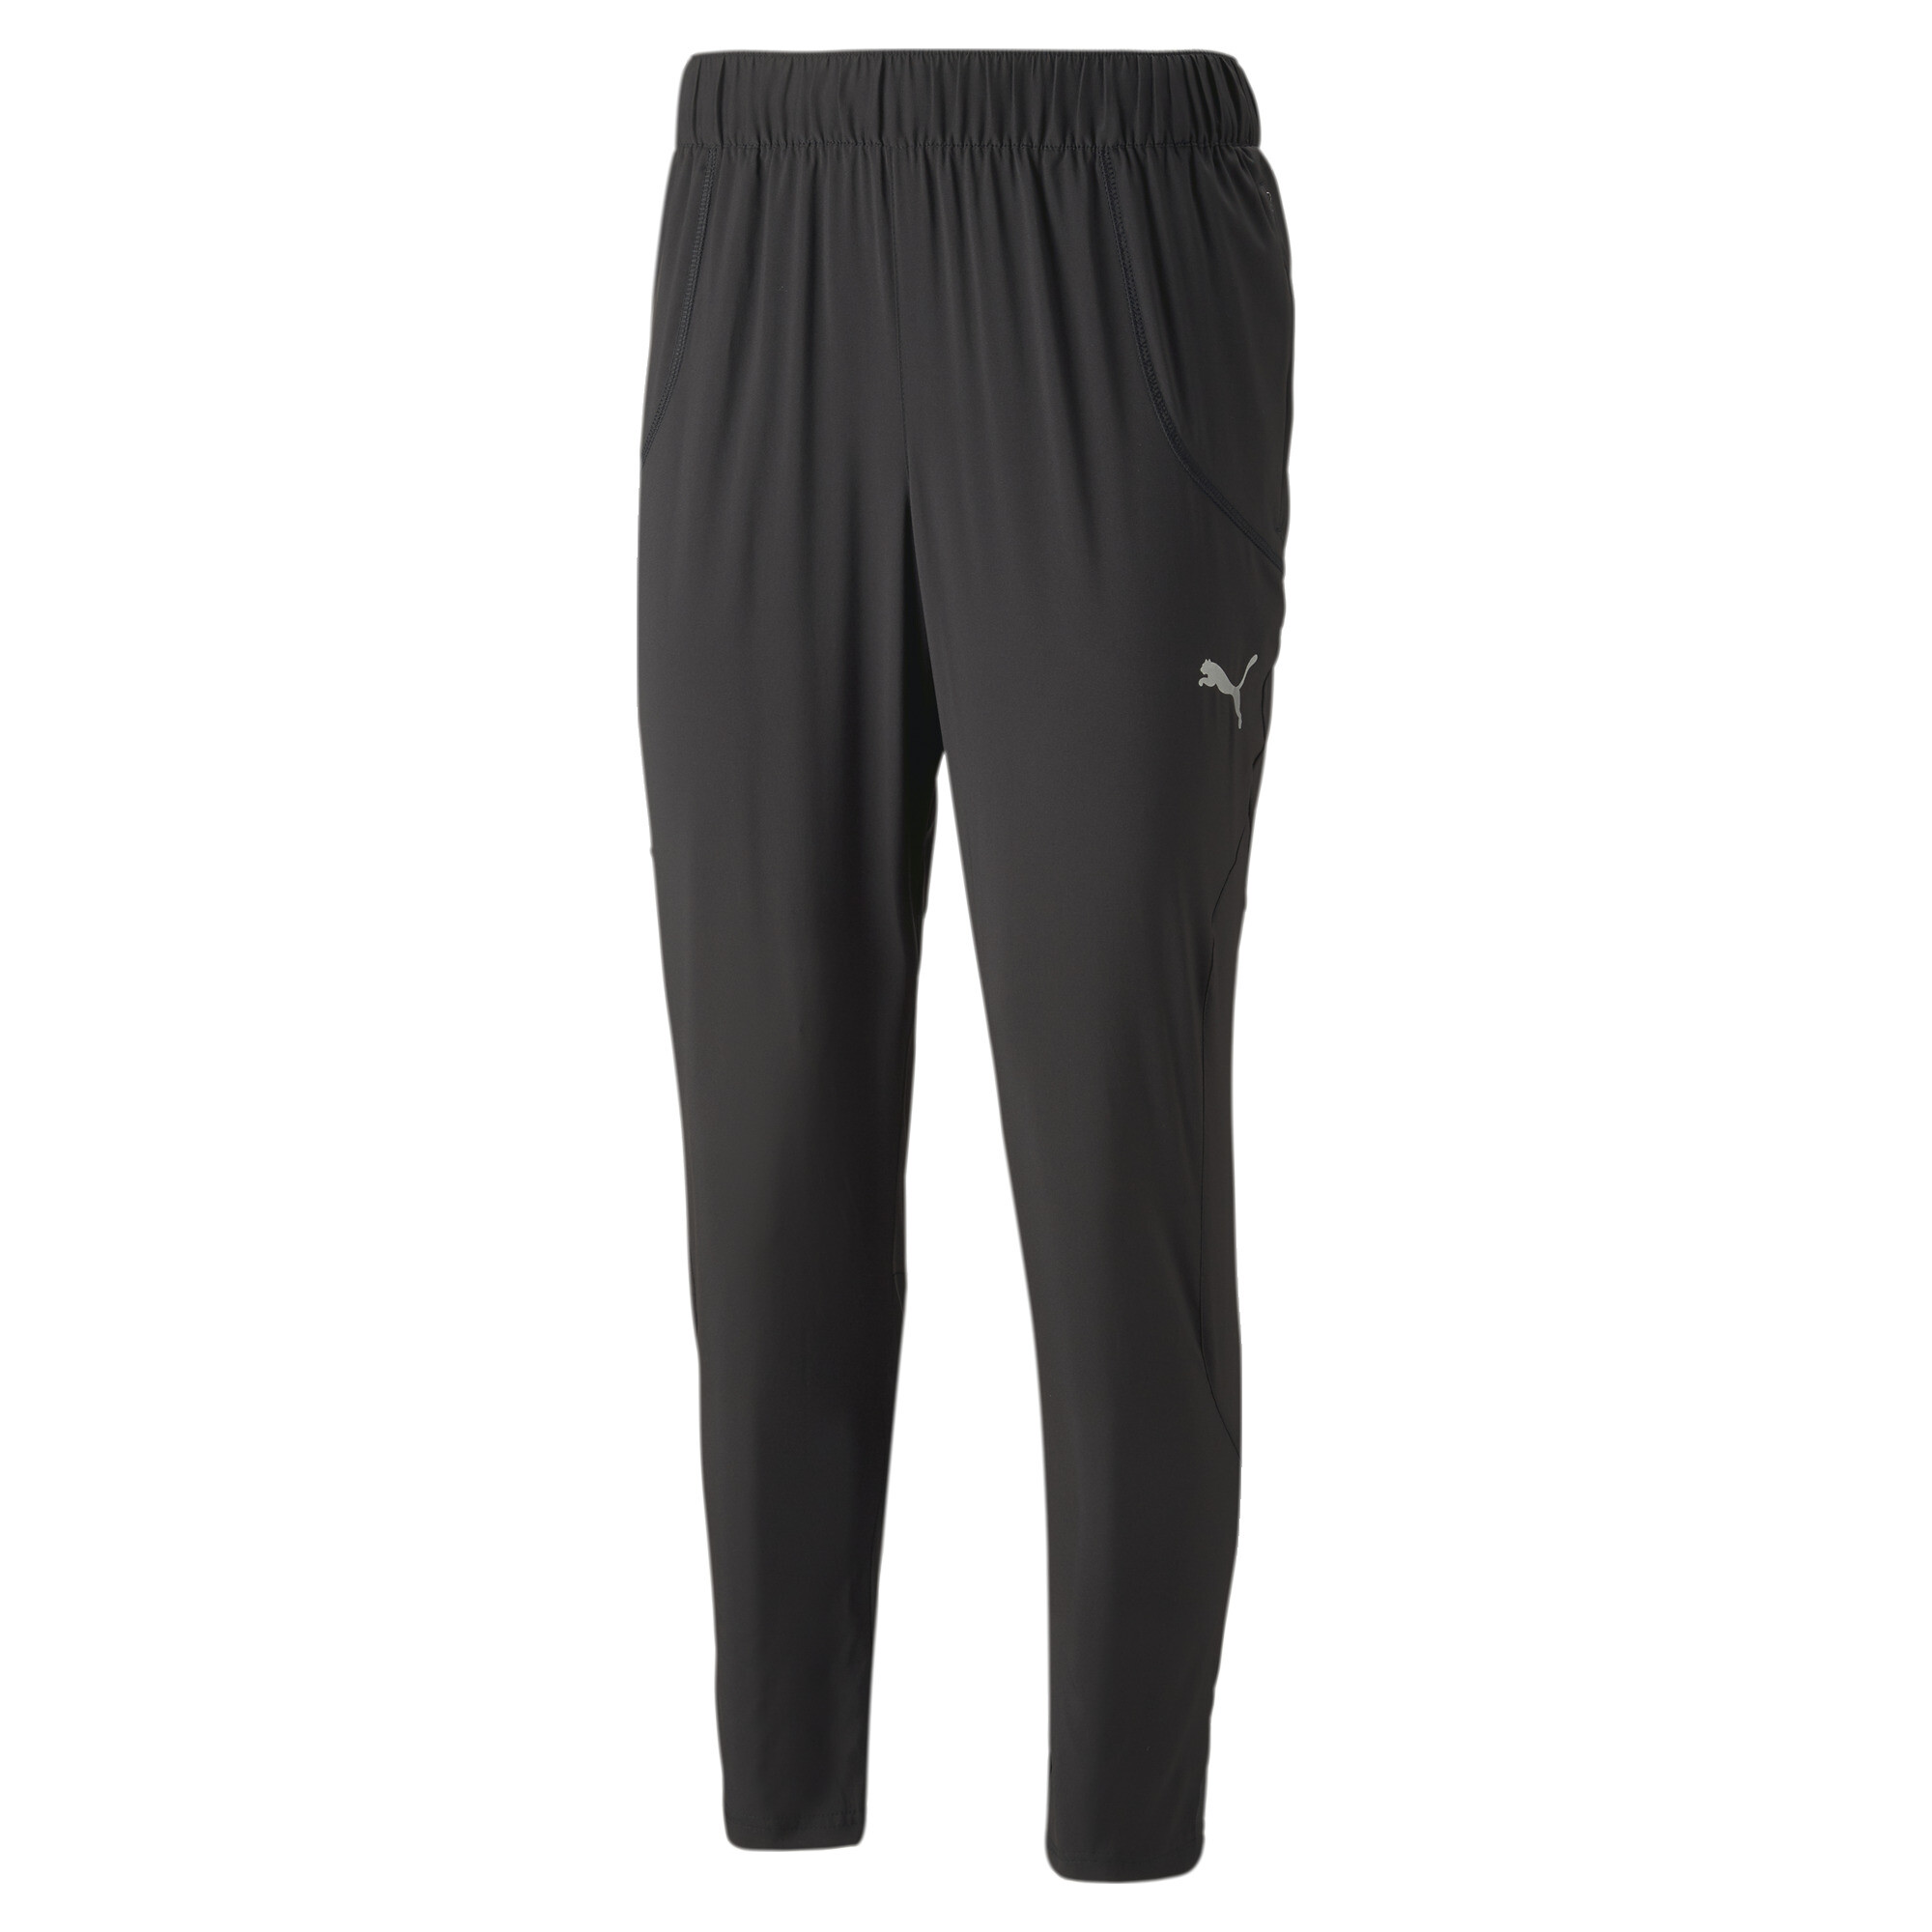 Men's PUMA RUN Tapered Woven Running Pants Men In Black, Size Small